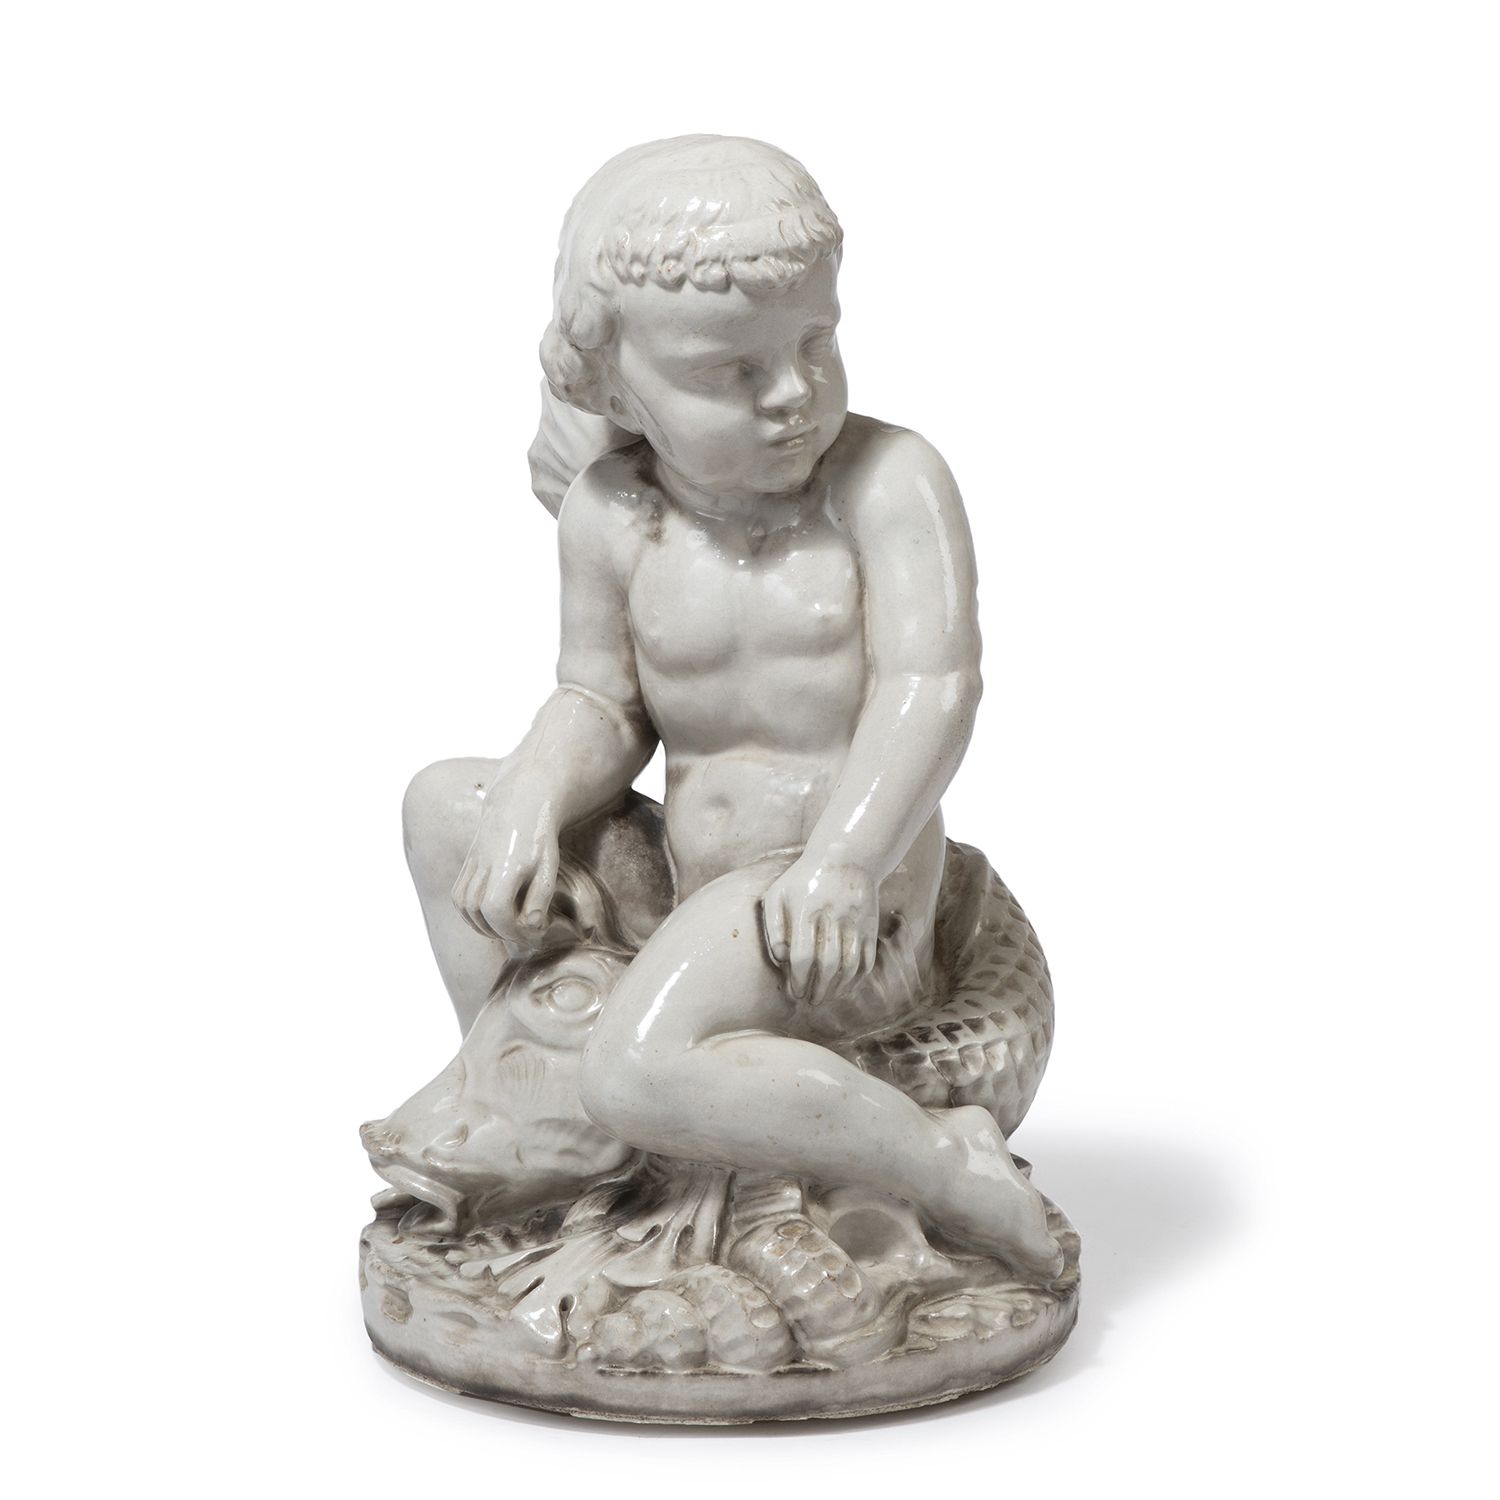 Null LOUIS SÜE (ATTRIBUTED TO)

Earthenware sculpture representing a putti on a &hellip;